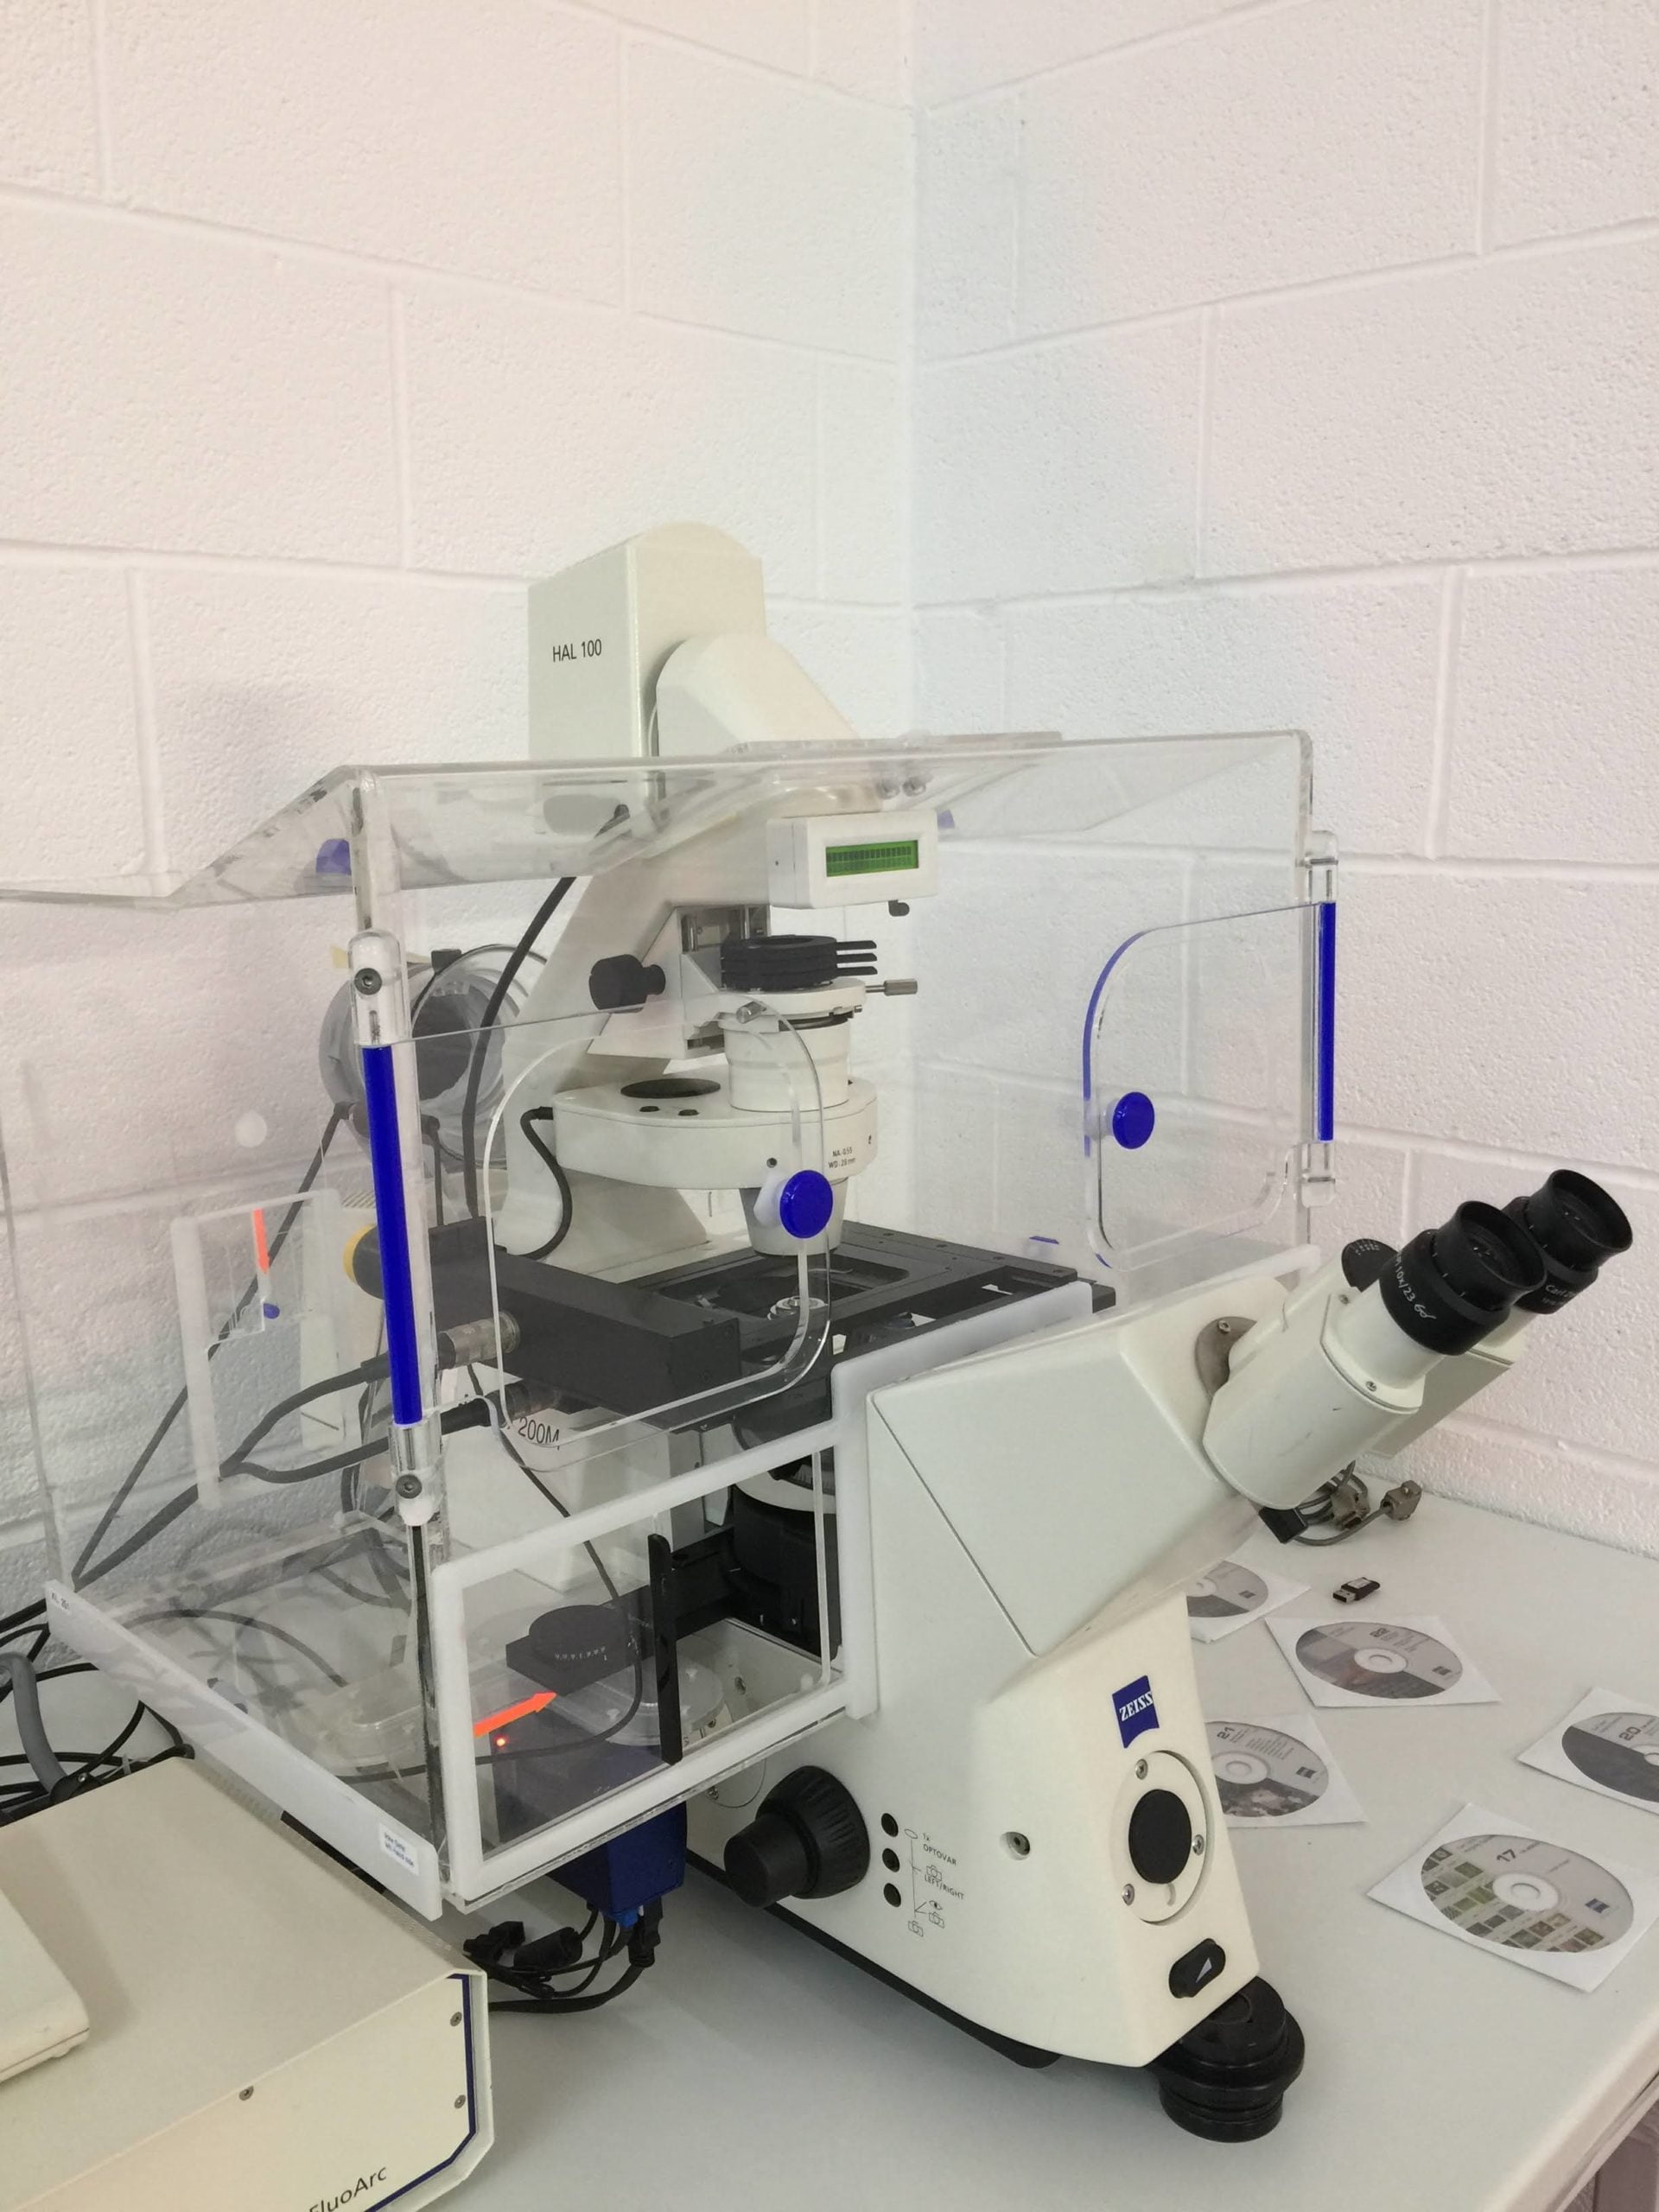 zeiss axiovert 200m inverted fluorescence microscope with co2 incubation system